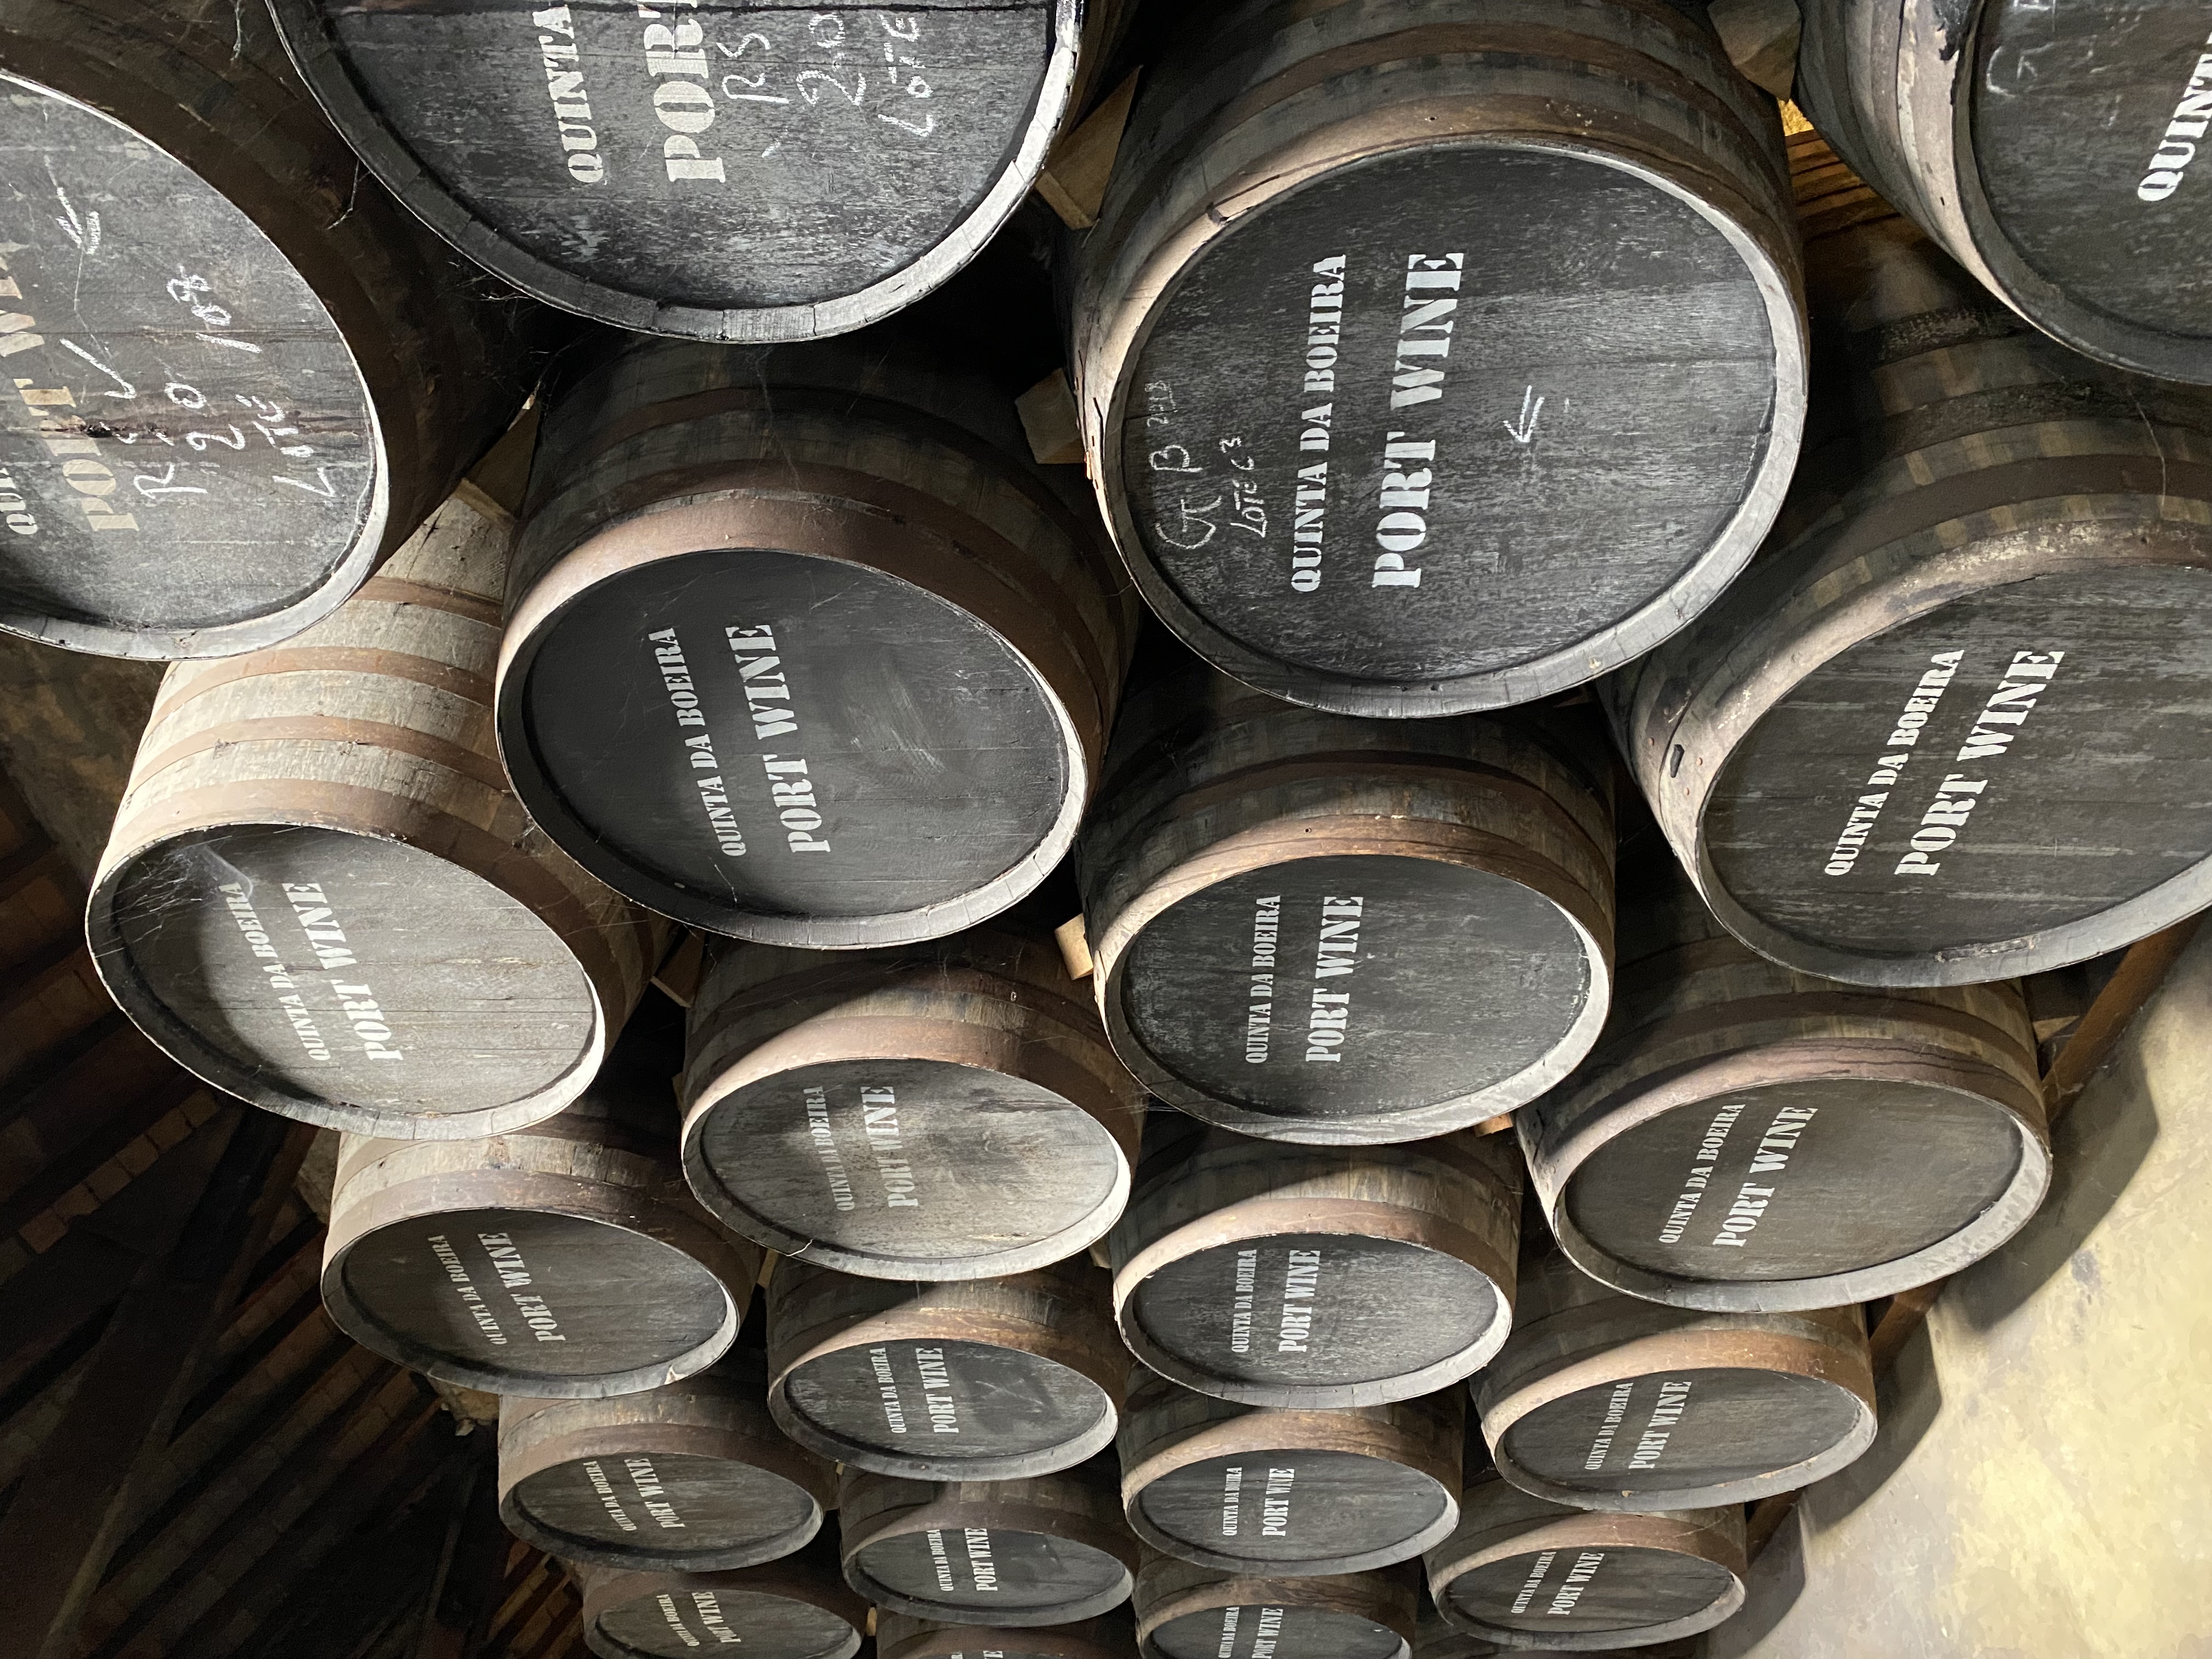 Stacked barrels of port wine in a wine cellar